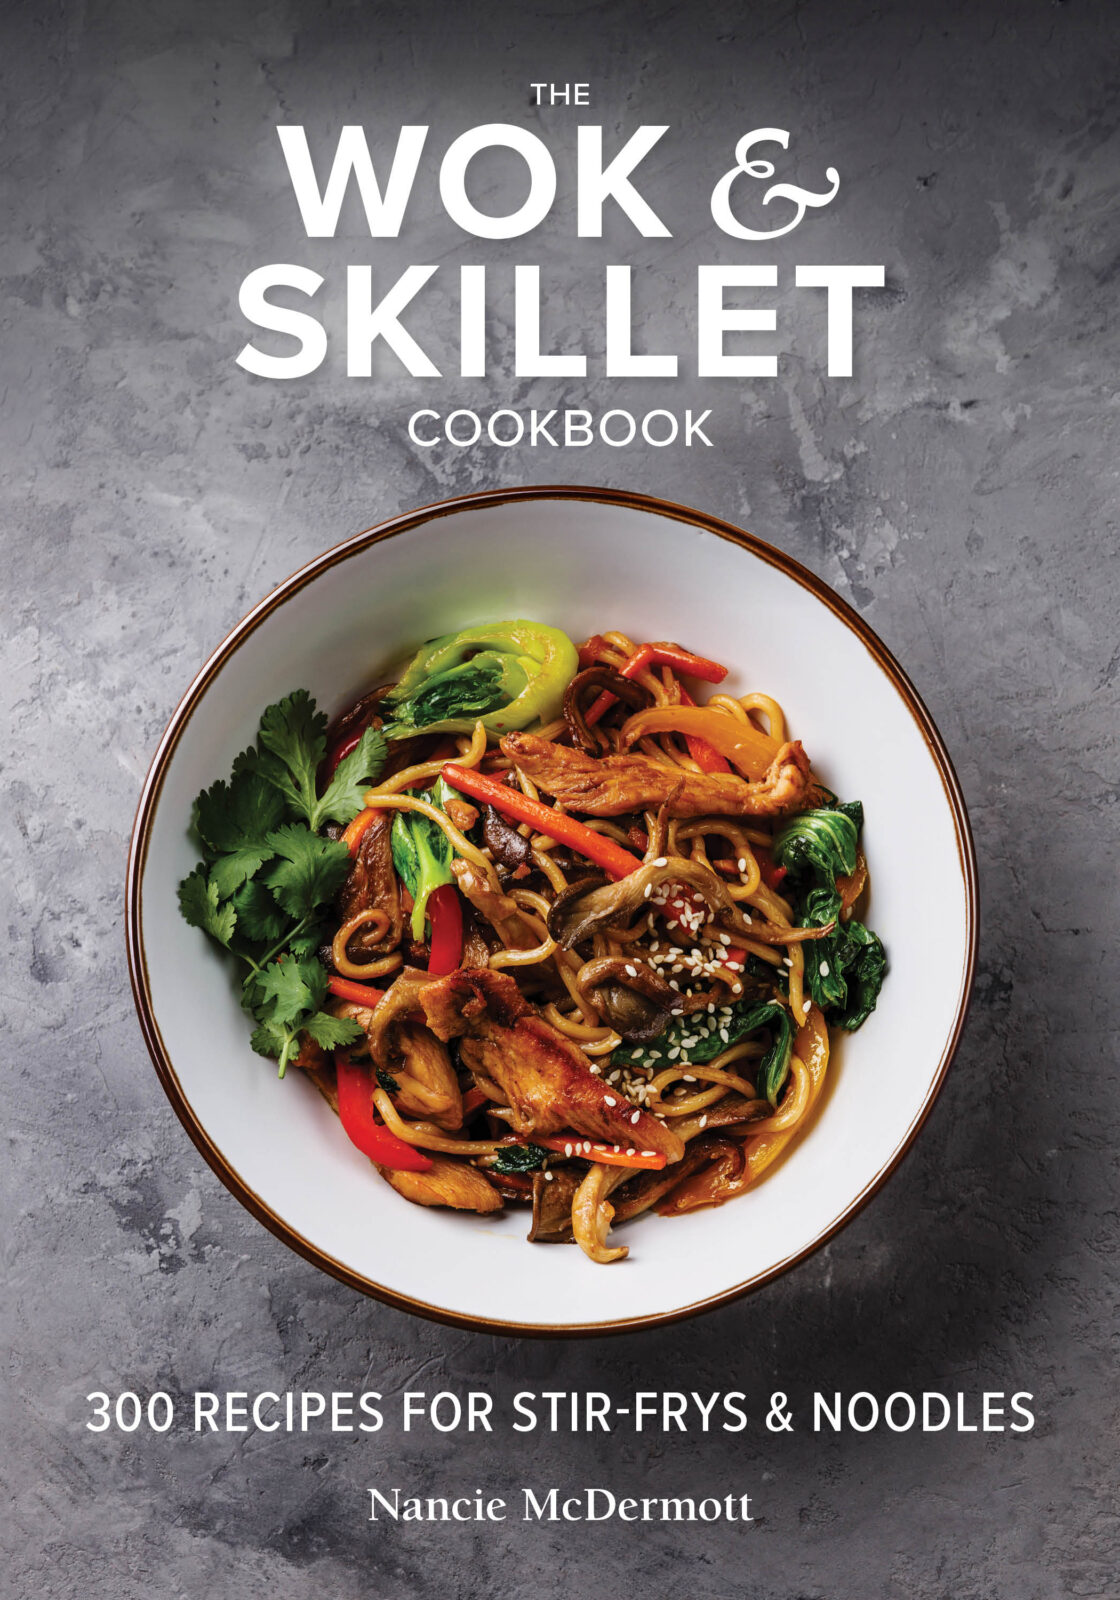 The Wok and Skillet Cookbook